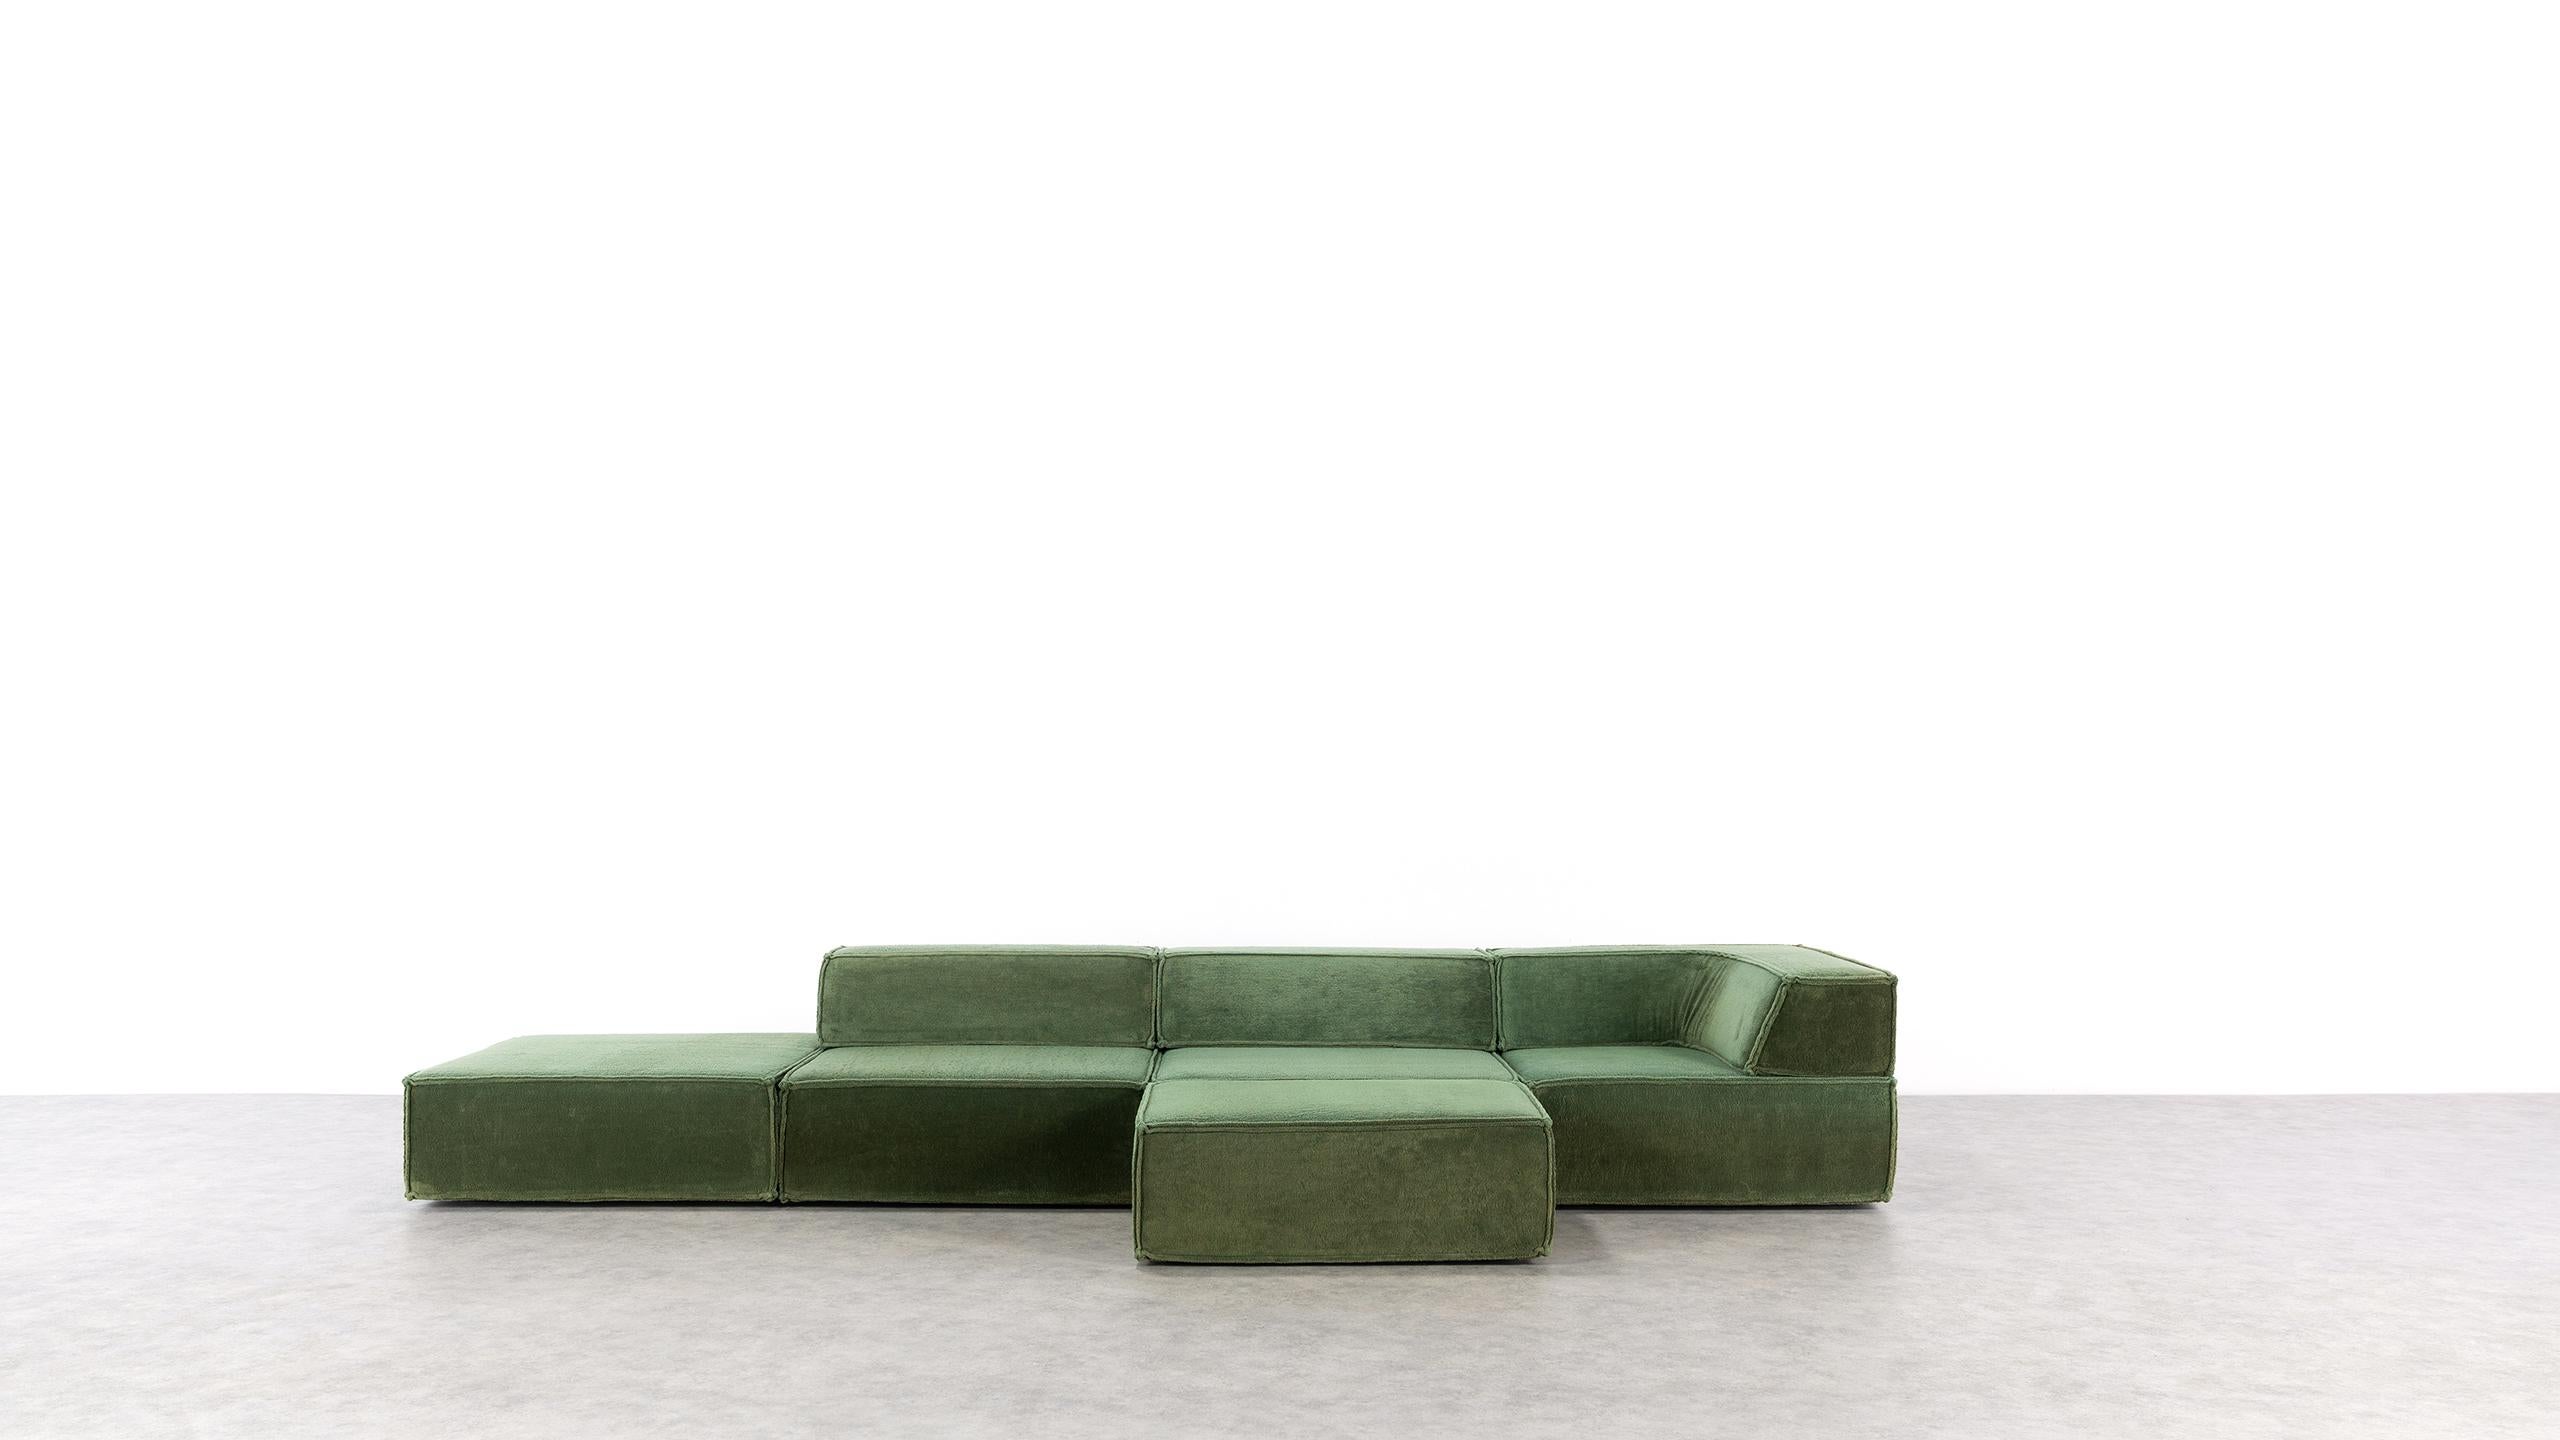 Late 20th Century COR Trio Modular Sofa, Giant Landscape in Green, 1972 by Team Form AG, Swiss